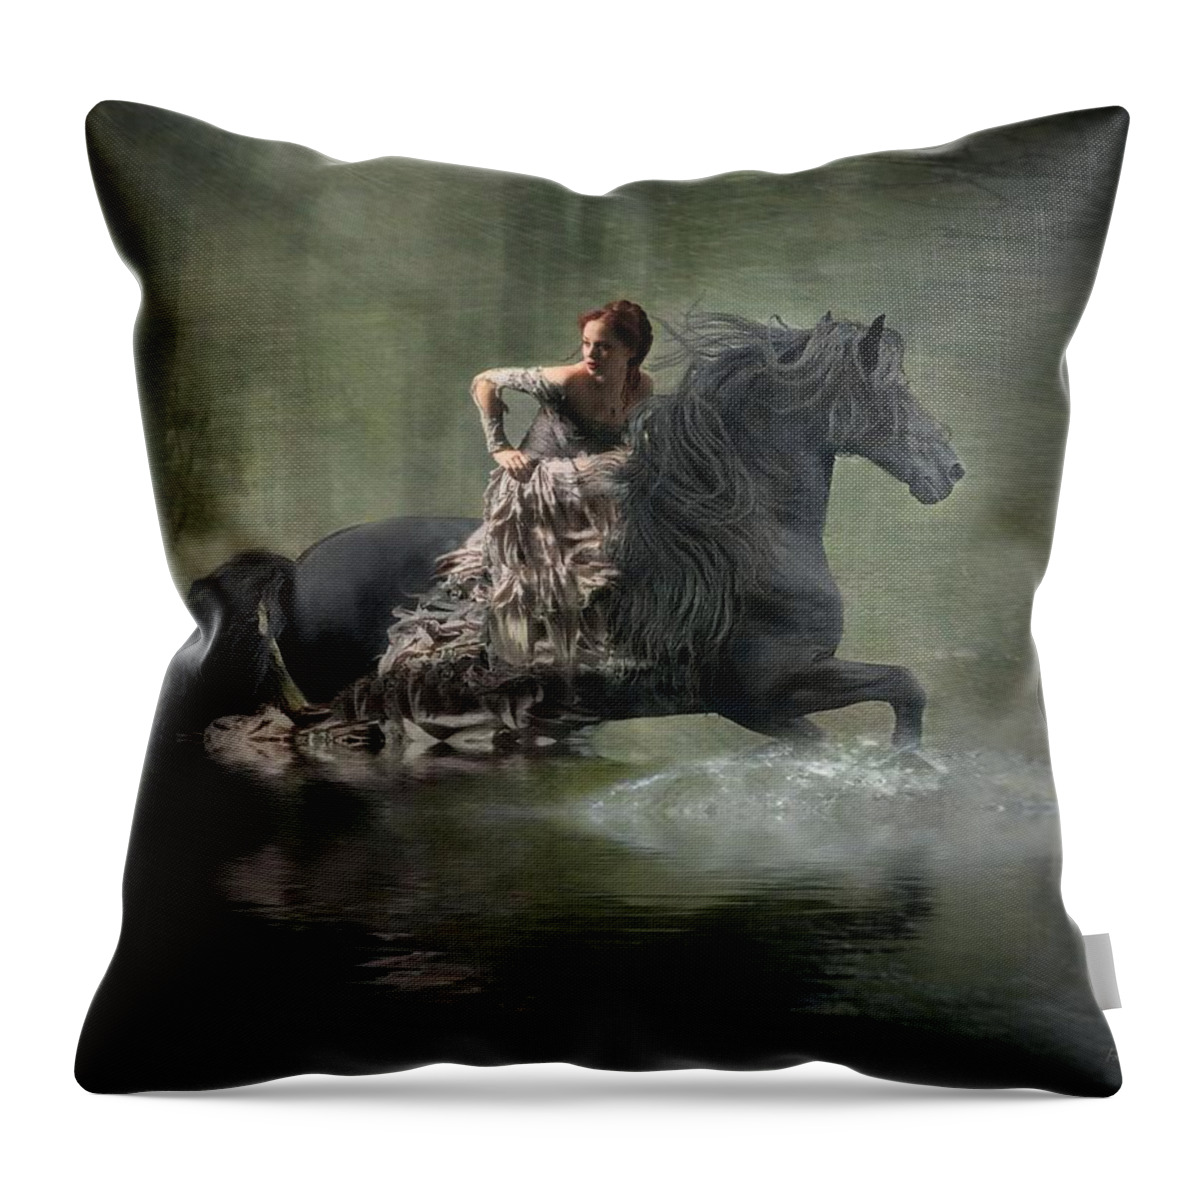 Girl Fleeing On Horse Throw Pillow featuring the photograph Liberated by Fran J Scott